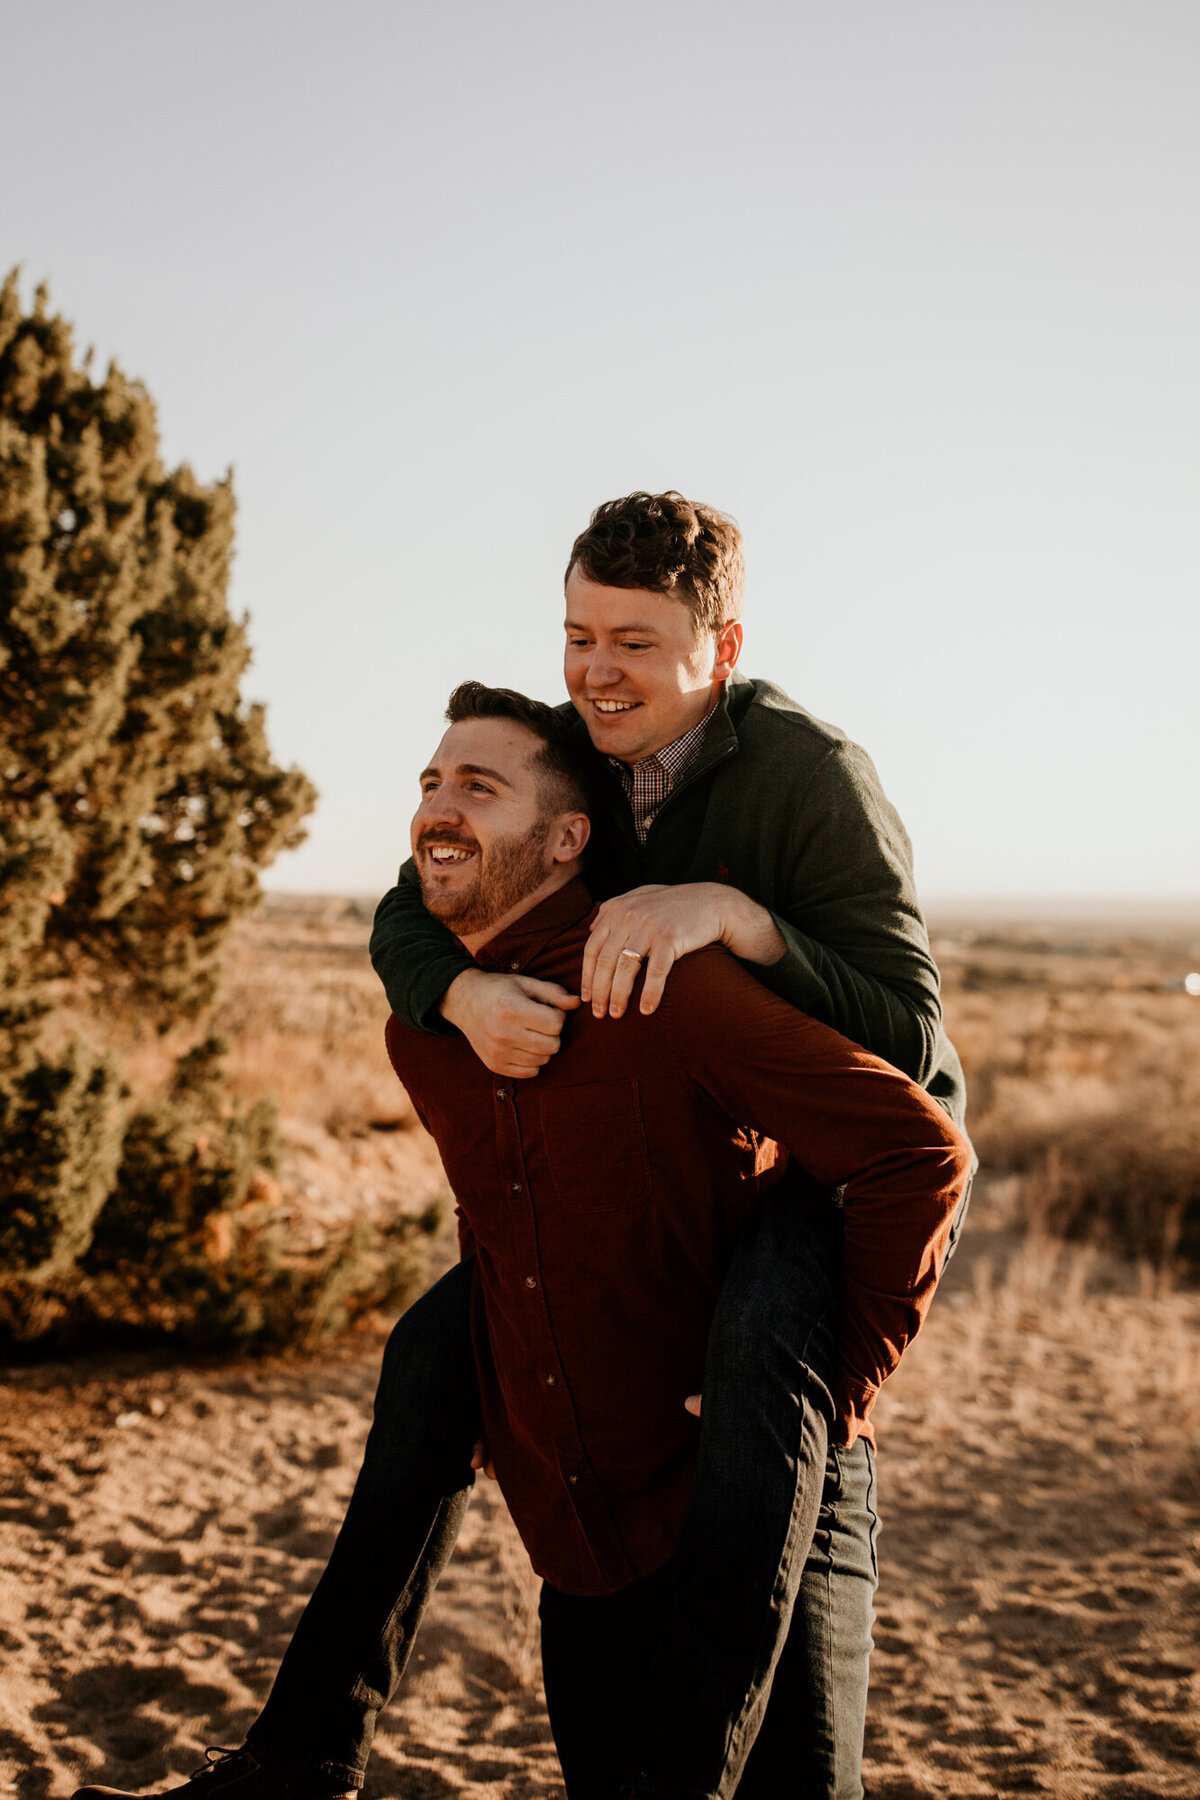 piggy back ride with gay couple in the desert laughing